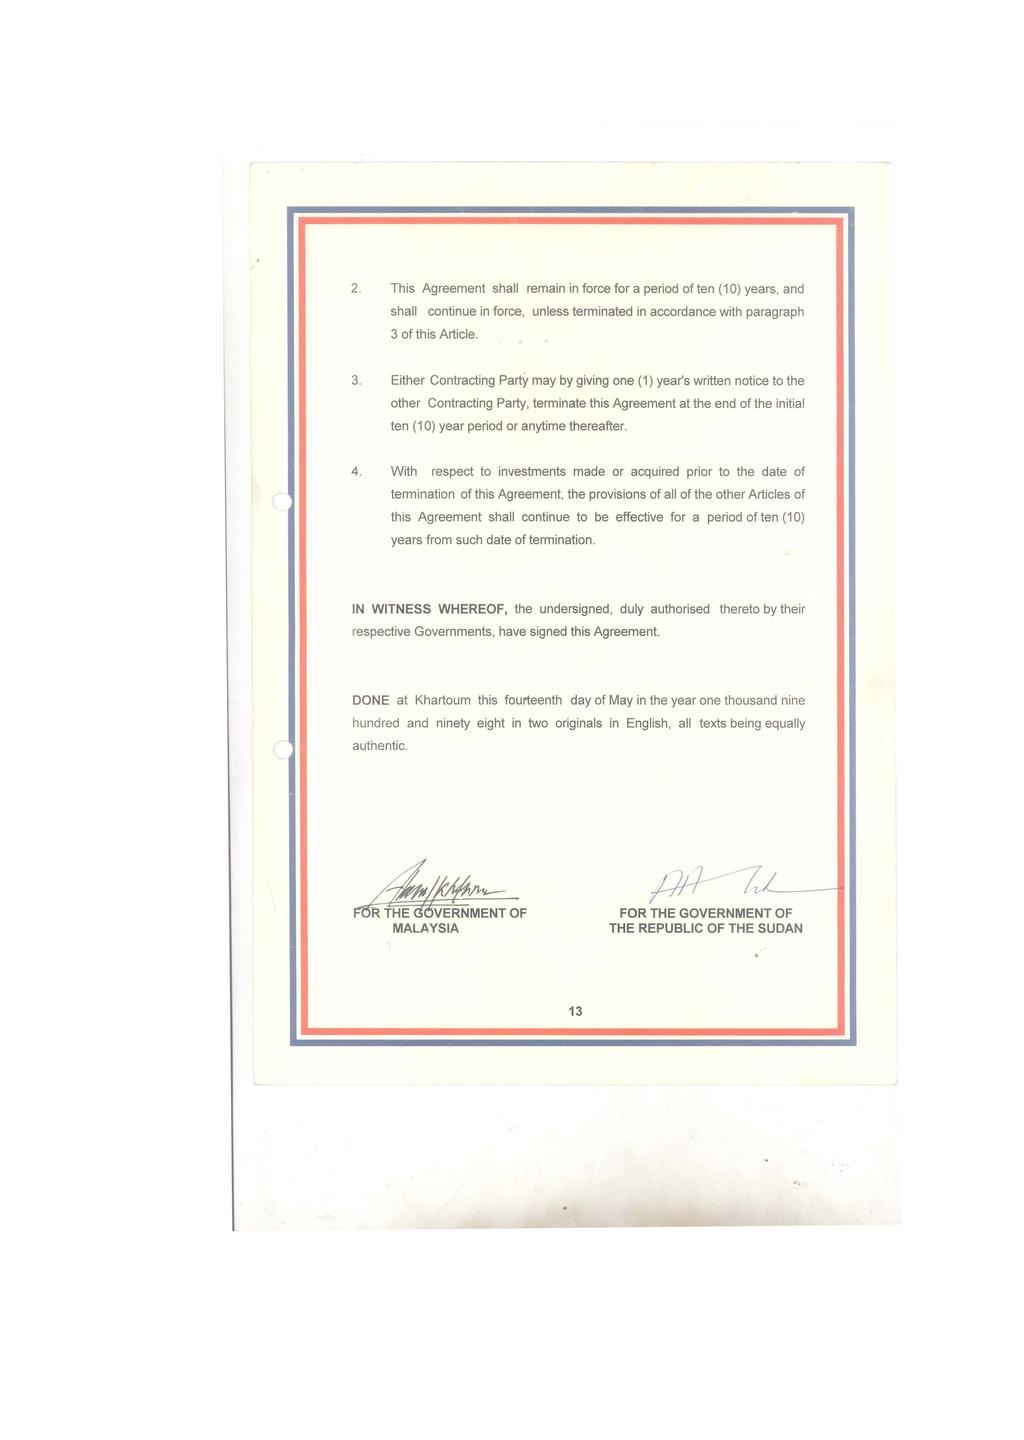 2. This Agreement shall remain in force for a period of ten (10) years, and shall continue in force, unless terminated in accordance with paragraph 3 